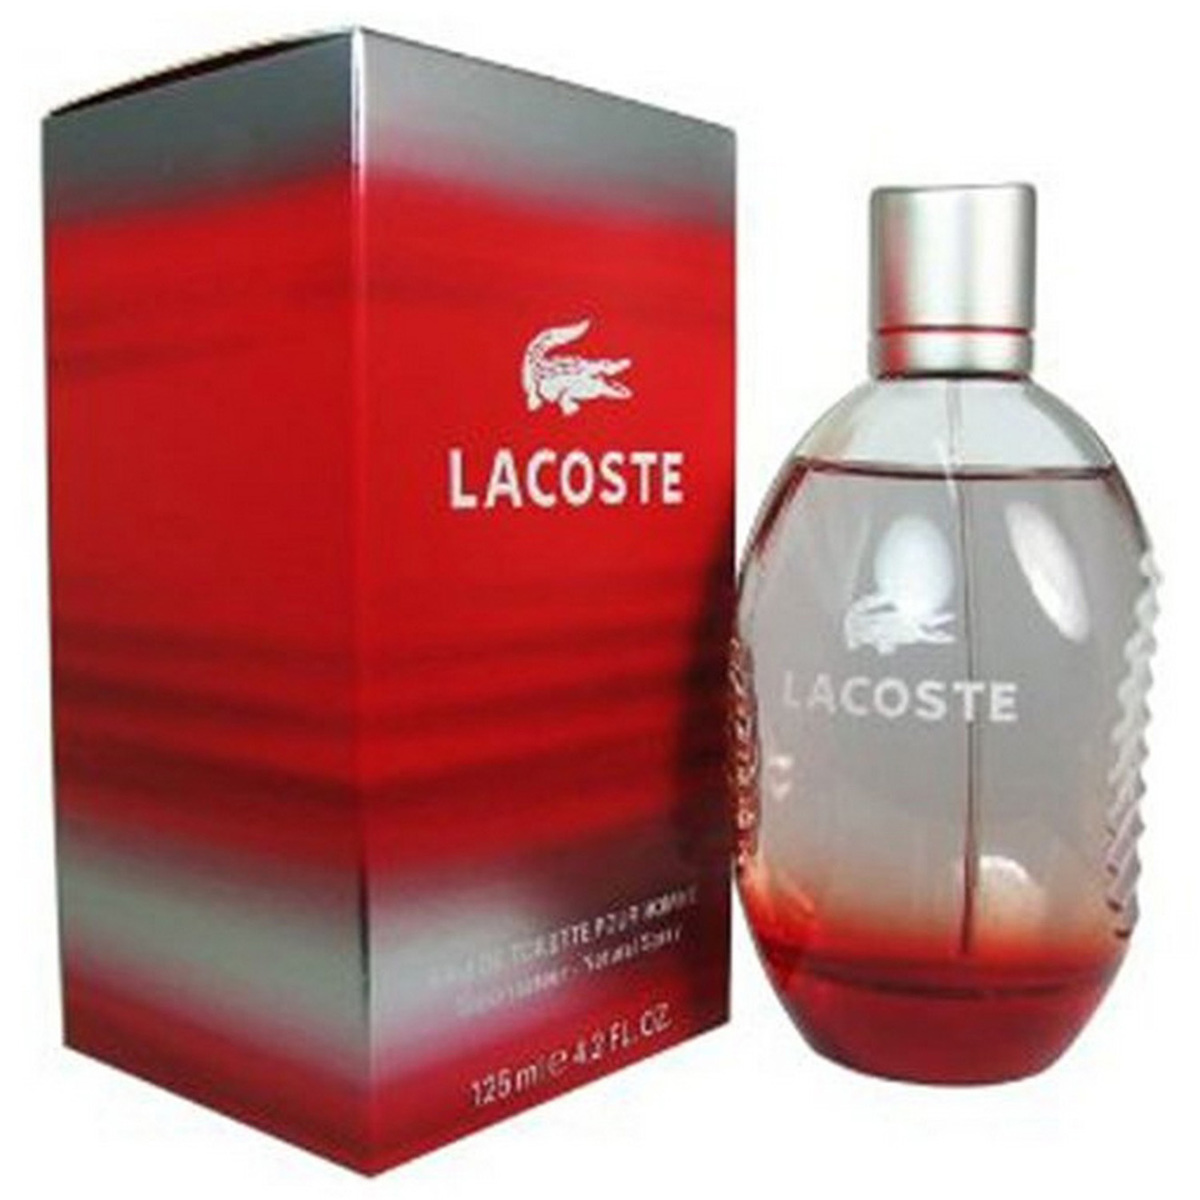 Лакост красный мужской. Lacoste Style in Play Red, EDT, 125 ml. Lacoste Red Style in Play men 125ml EDT. Lacoste Red men 50 ml. Lacoste Red men.